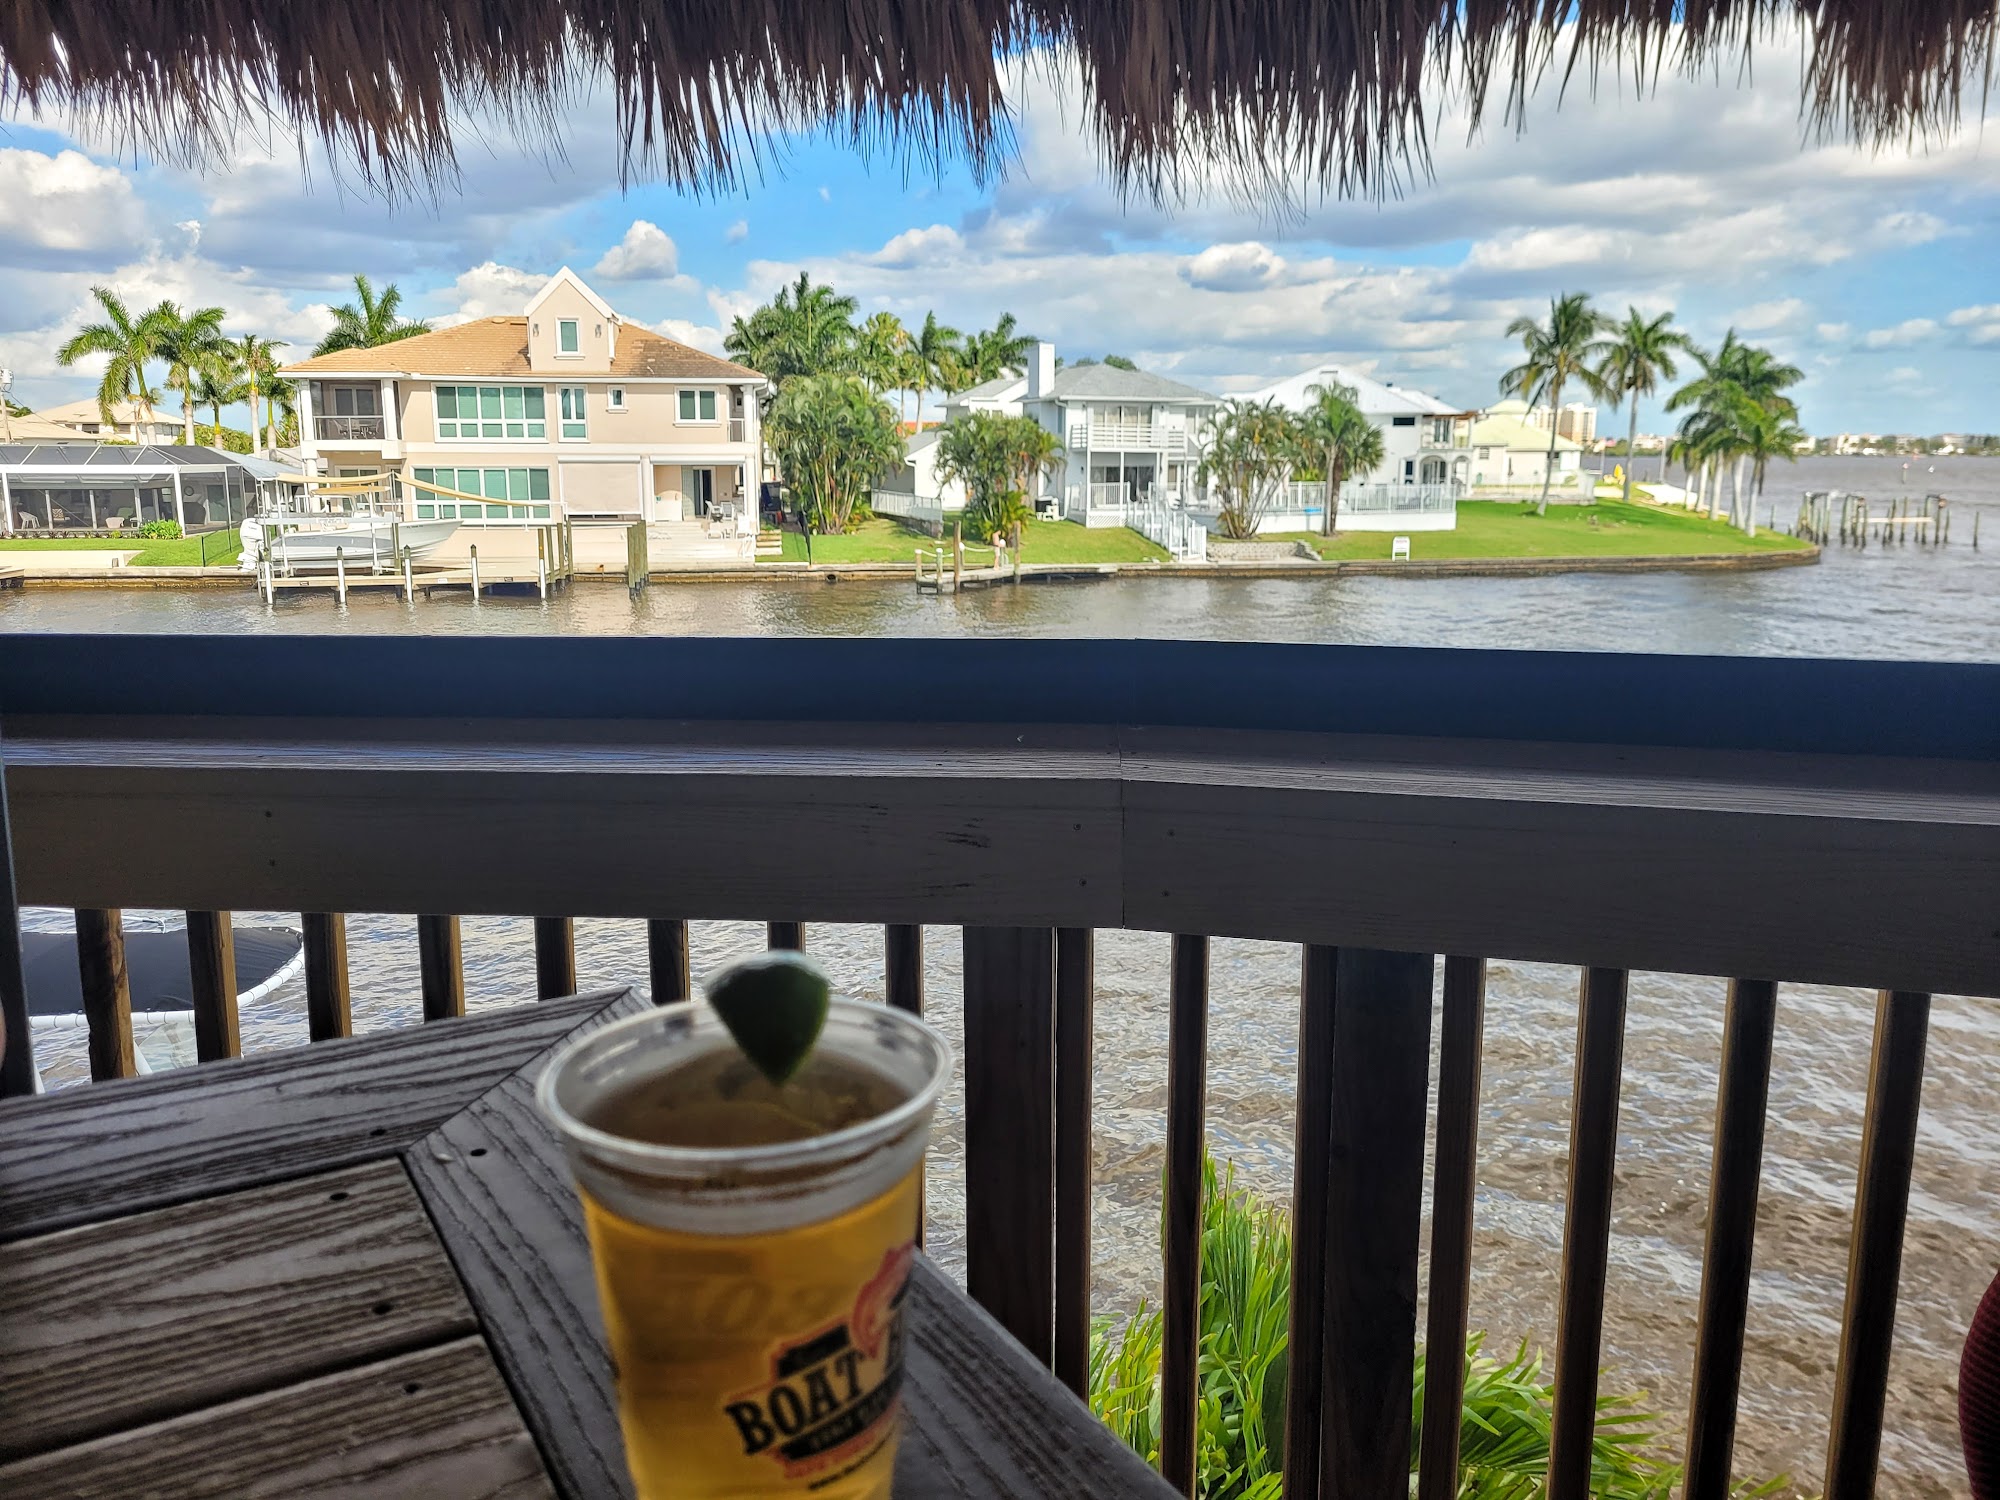 The Boathouse Tiki Bar & Grill - Cape Coral